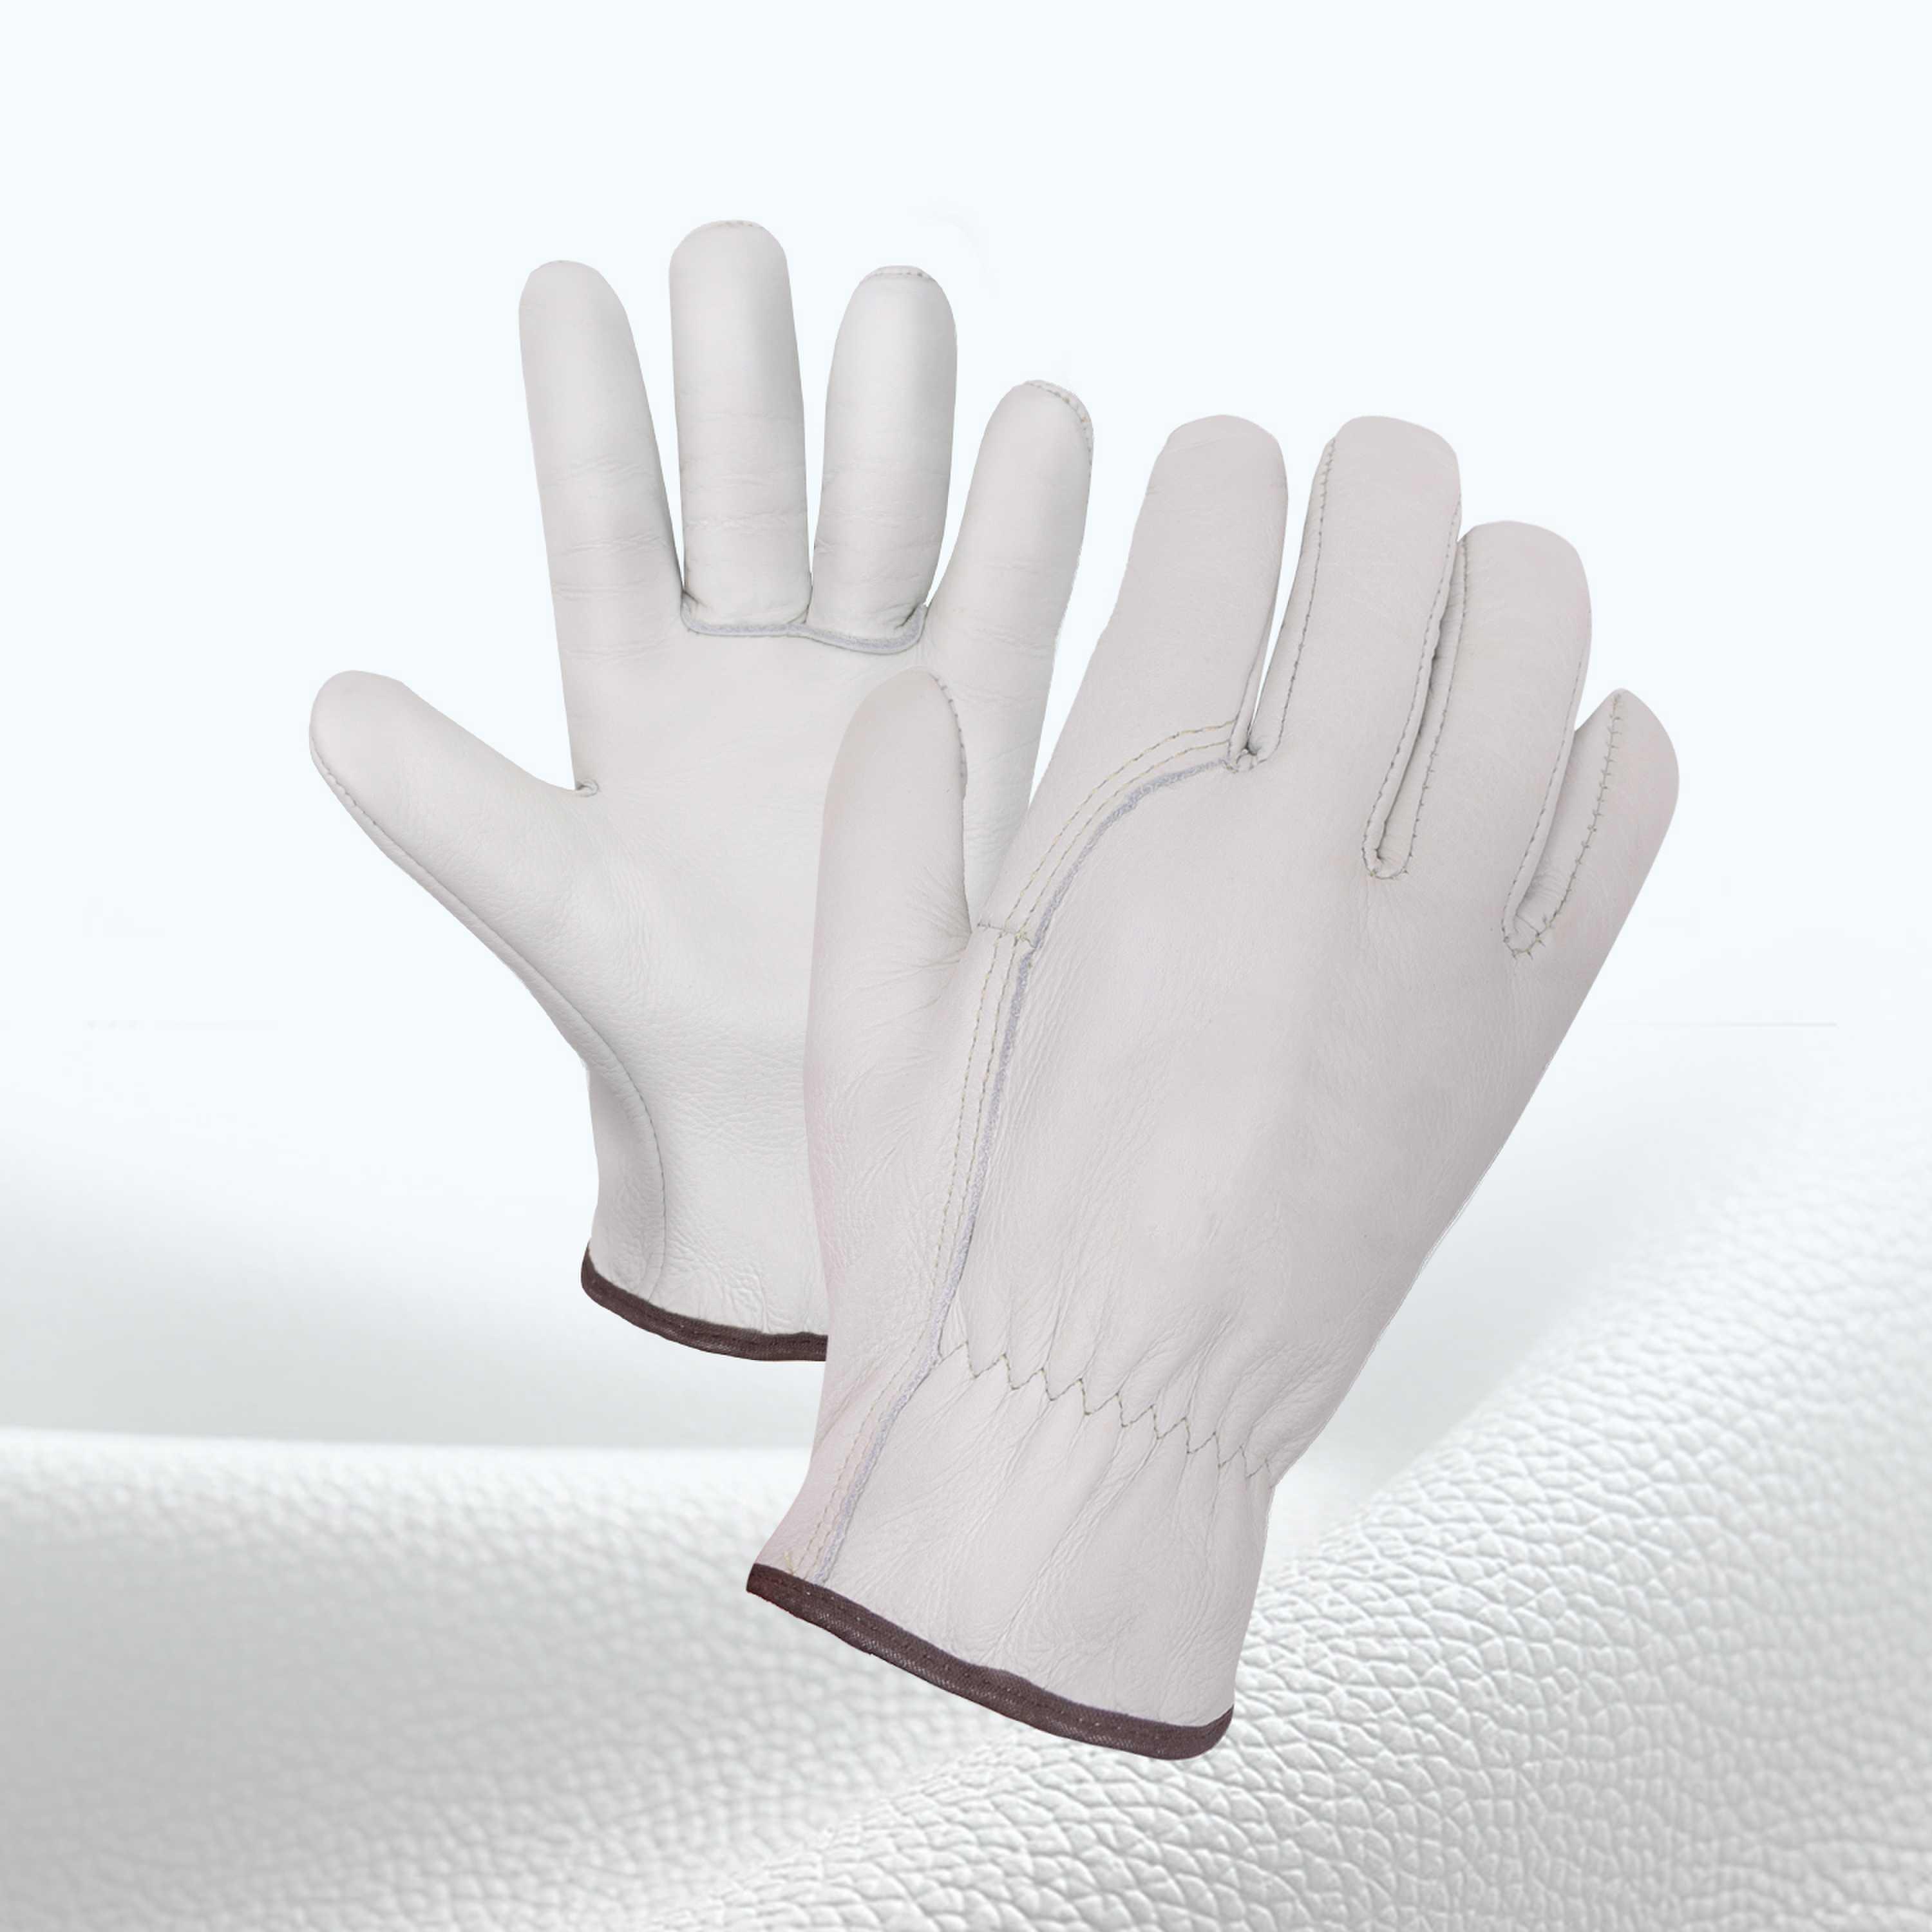 1293 PRISAFETY durable white full grain cowhide cut resistance construction safety working leather gloves for men women